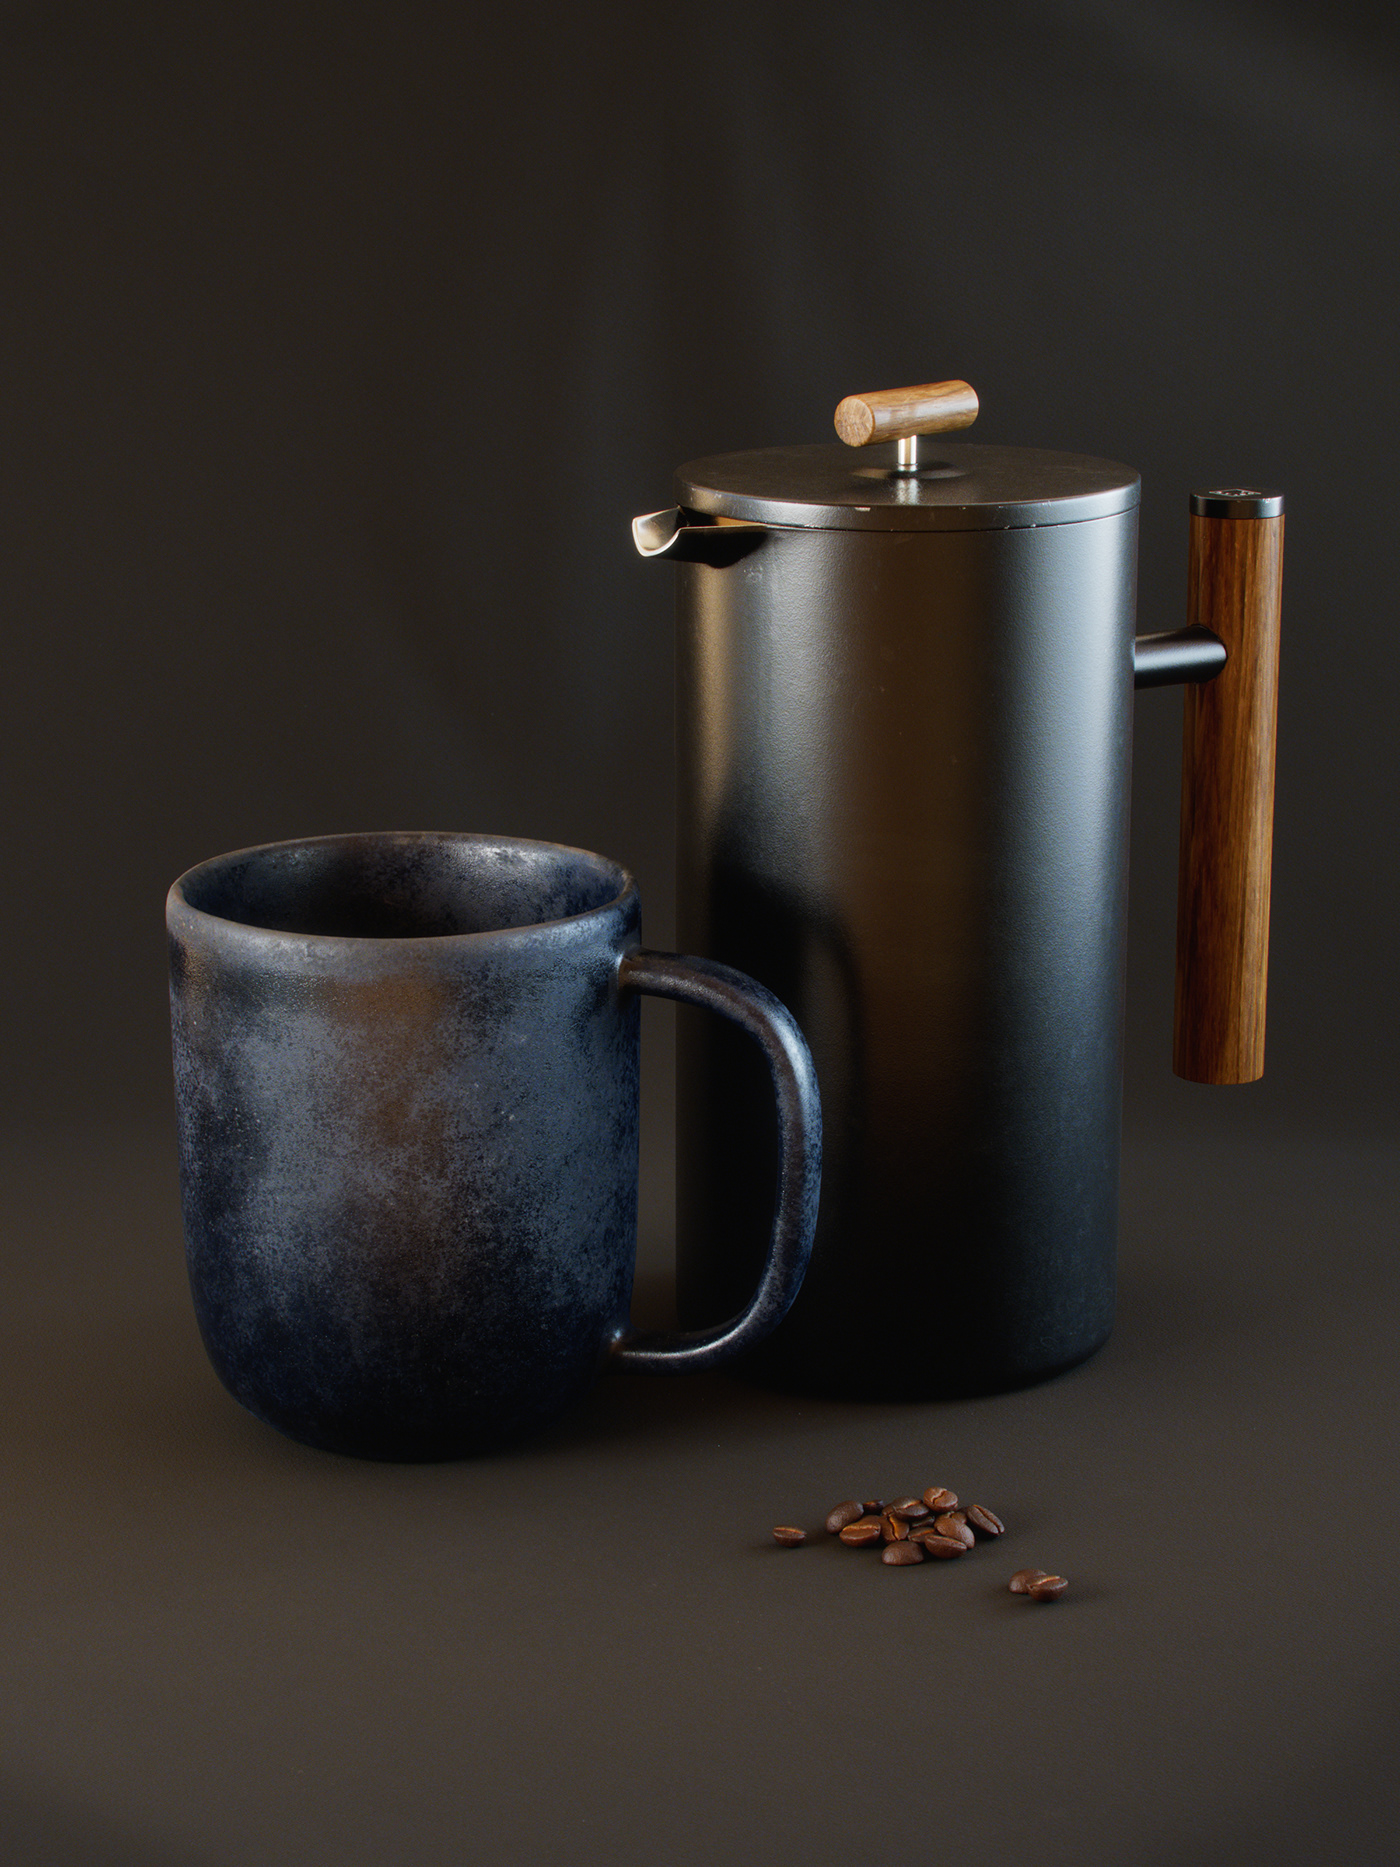 arnold beans CG CGI Coffee cup french press Maya modeling rendering Substance Painter texturing vfx